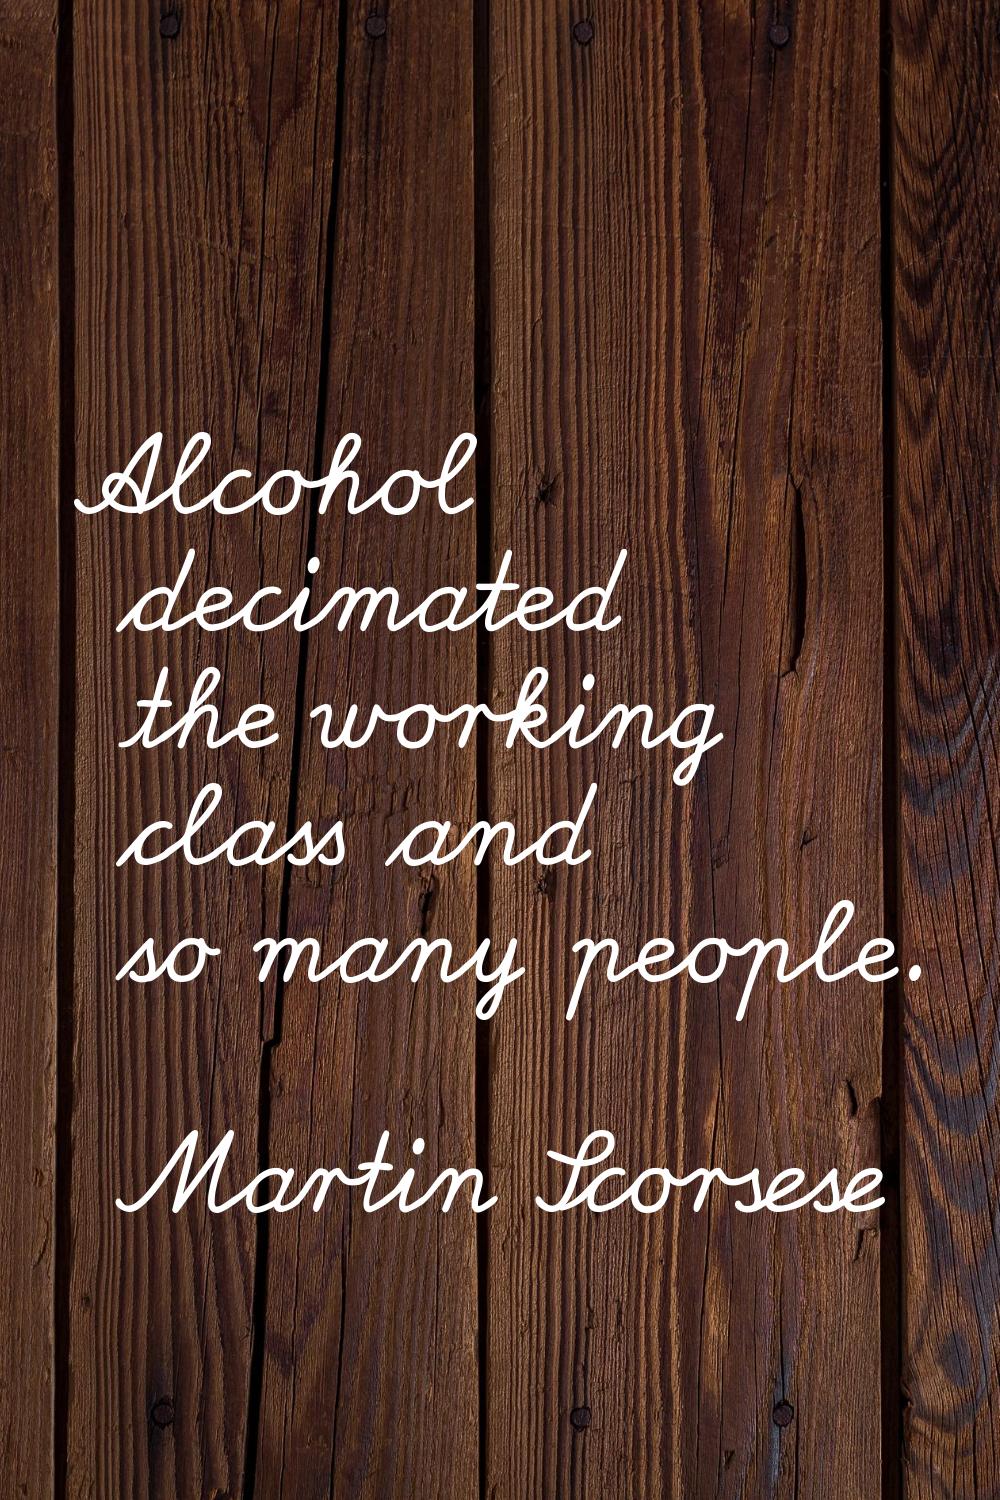 Alcohol decimated the working class and so many people.